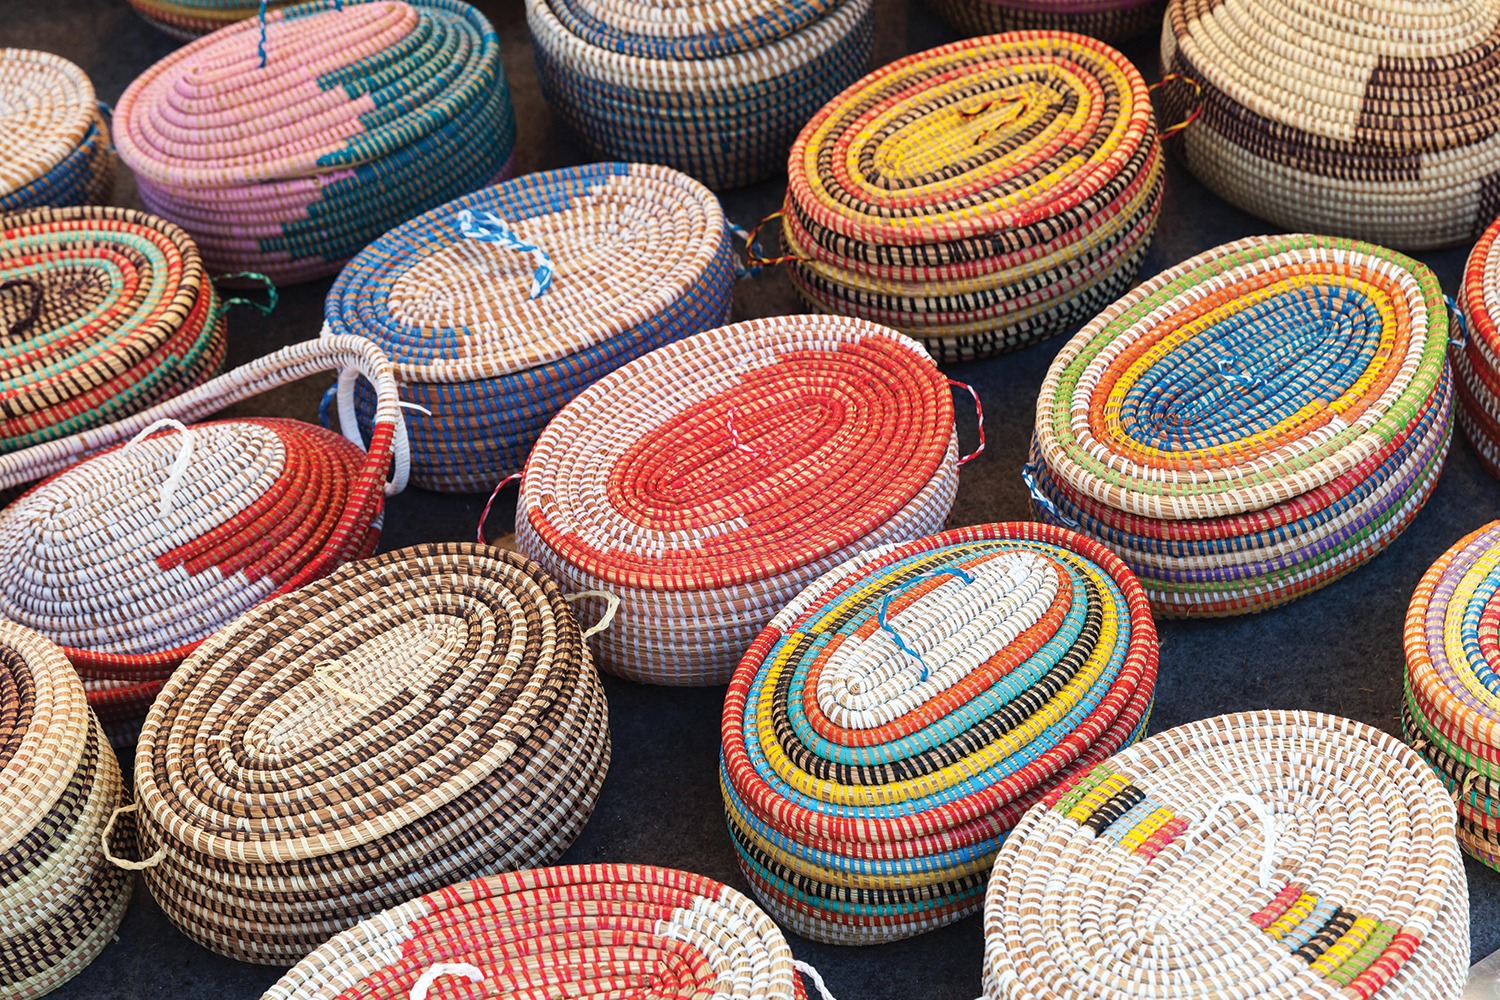 Colorful African wicker baskets